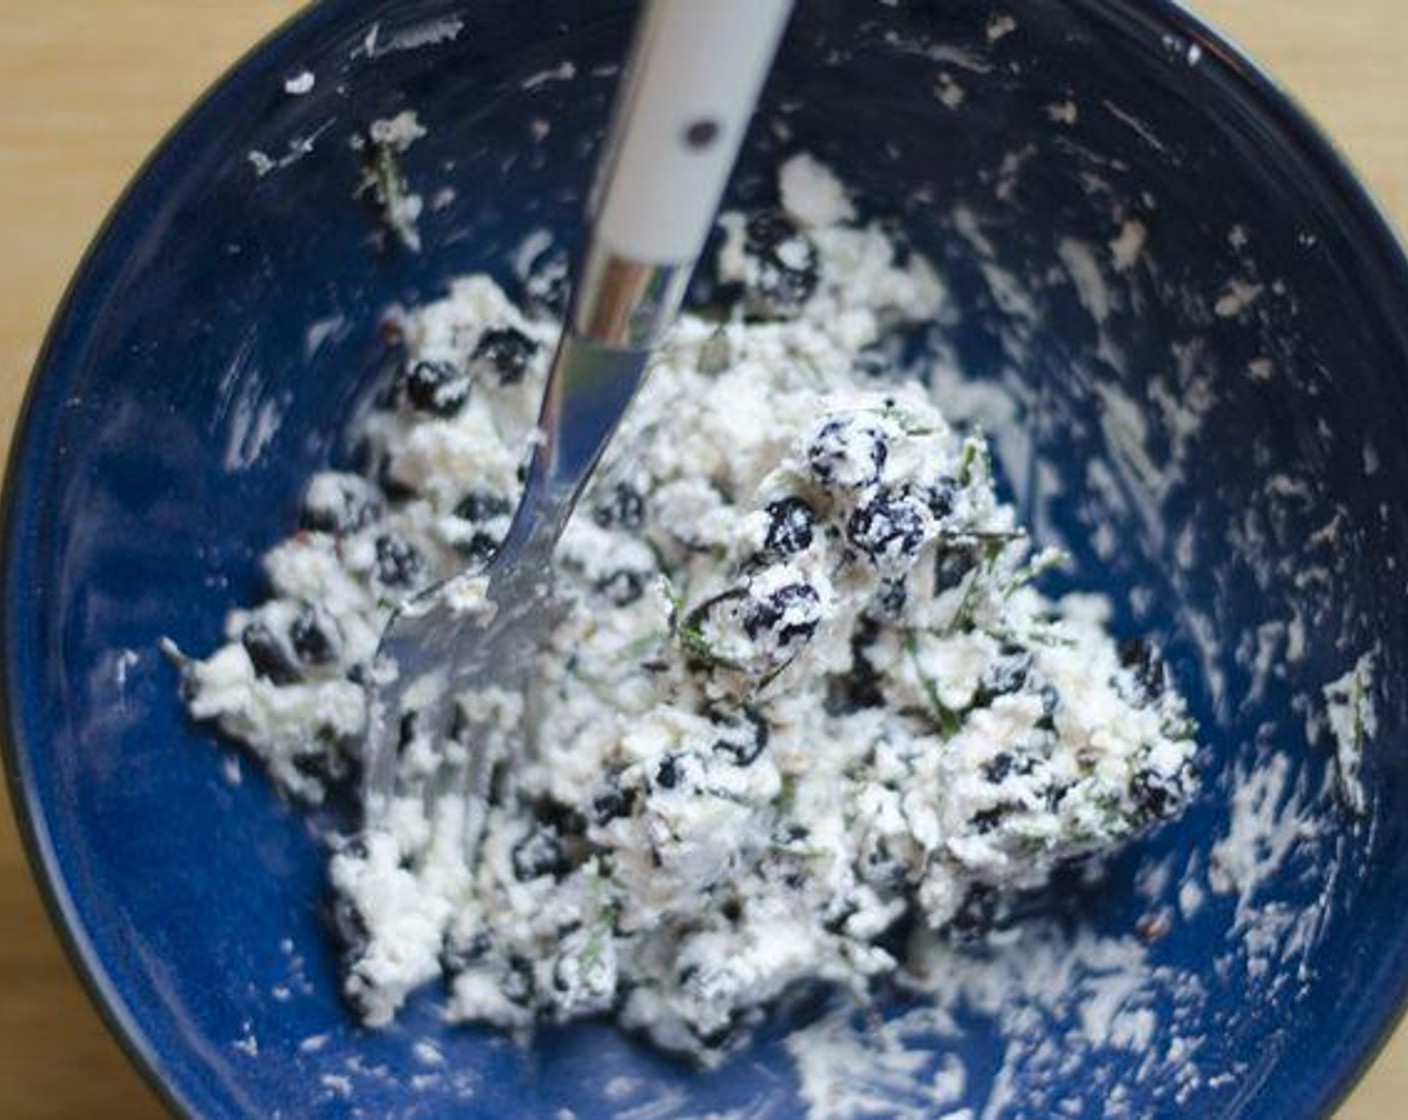 step 2 Mix together Goat Cheese (1/2 cup), Dried Blueberries (1/2 cup), Fresh Rosemary (1 Tbsp), Garlic (2 cloves), and Crushed Red Pepper Flakes (1/2 tsp).